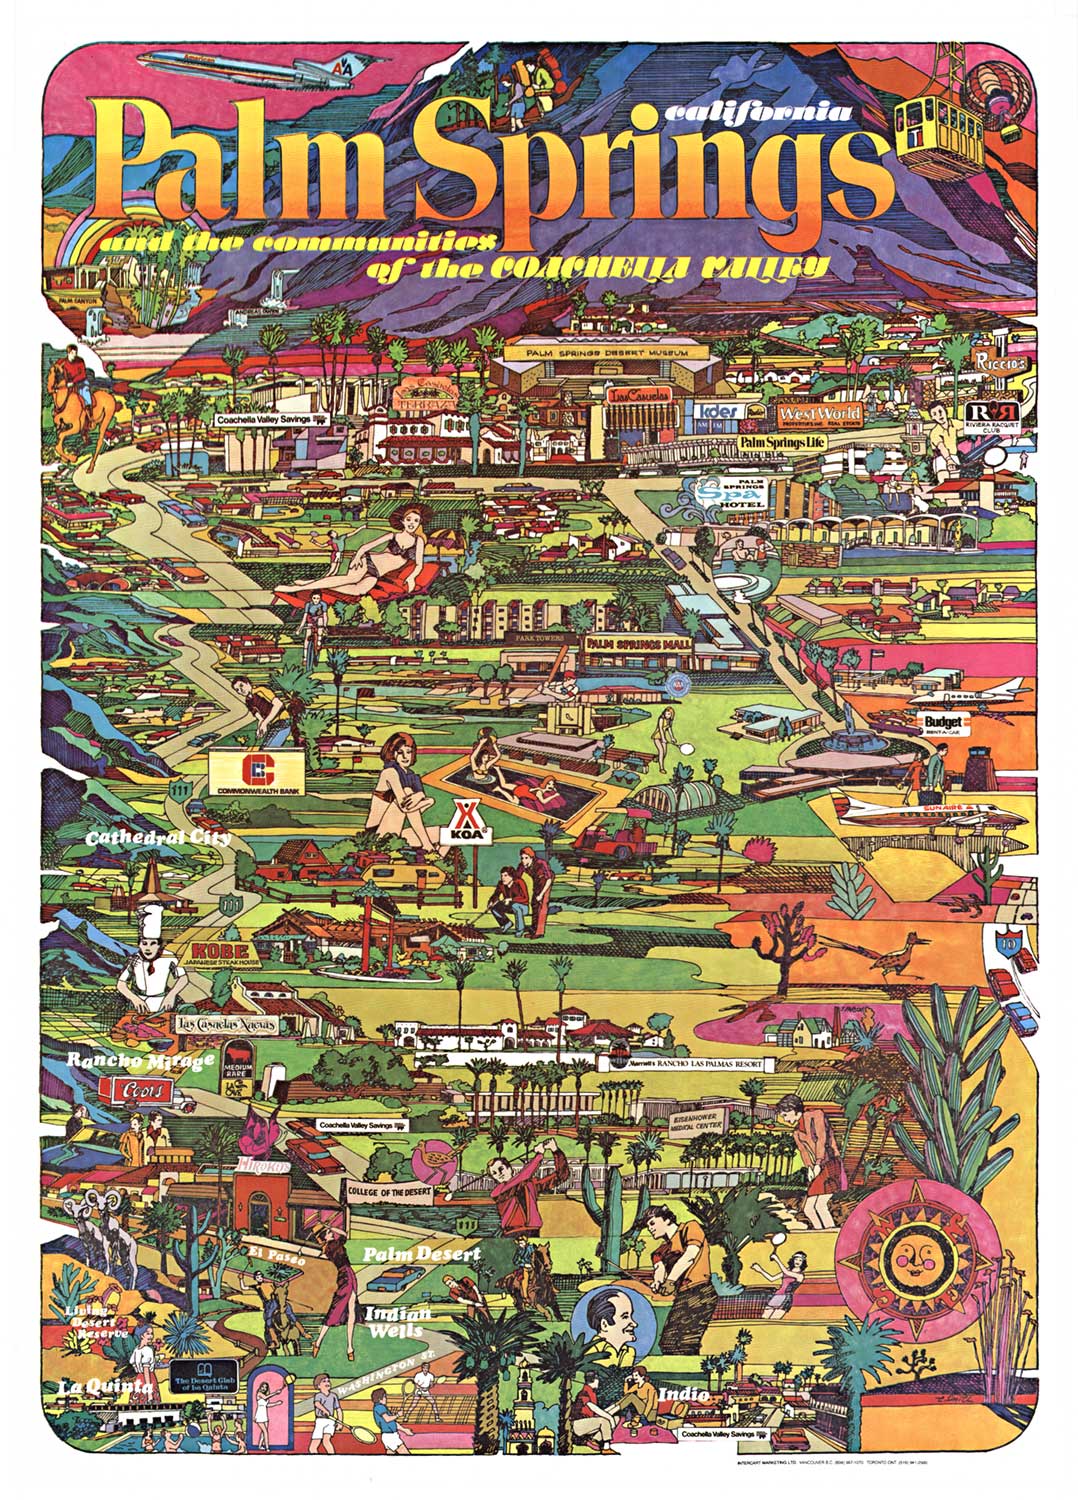 Original Palm Springs, California and the communities of the Coachella Valley vintage poster. A fun image map of the Palm Springs area and activities and hotspots to visit. <br>Linen backed in very fine condition, ready to frame. <br>The artist is E. Sm